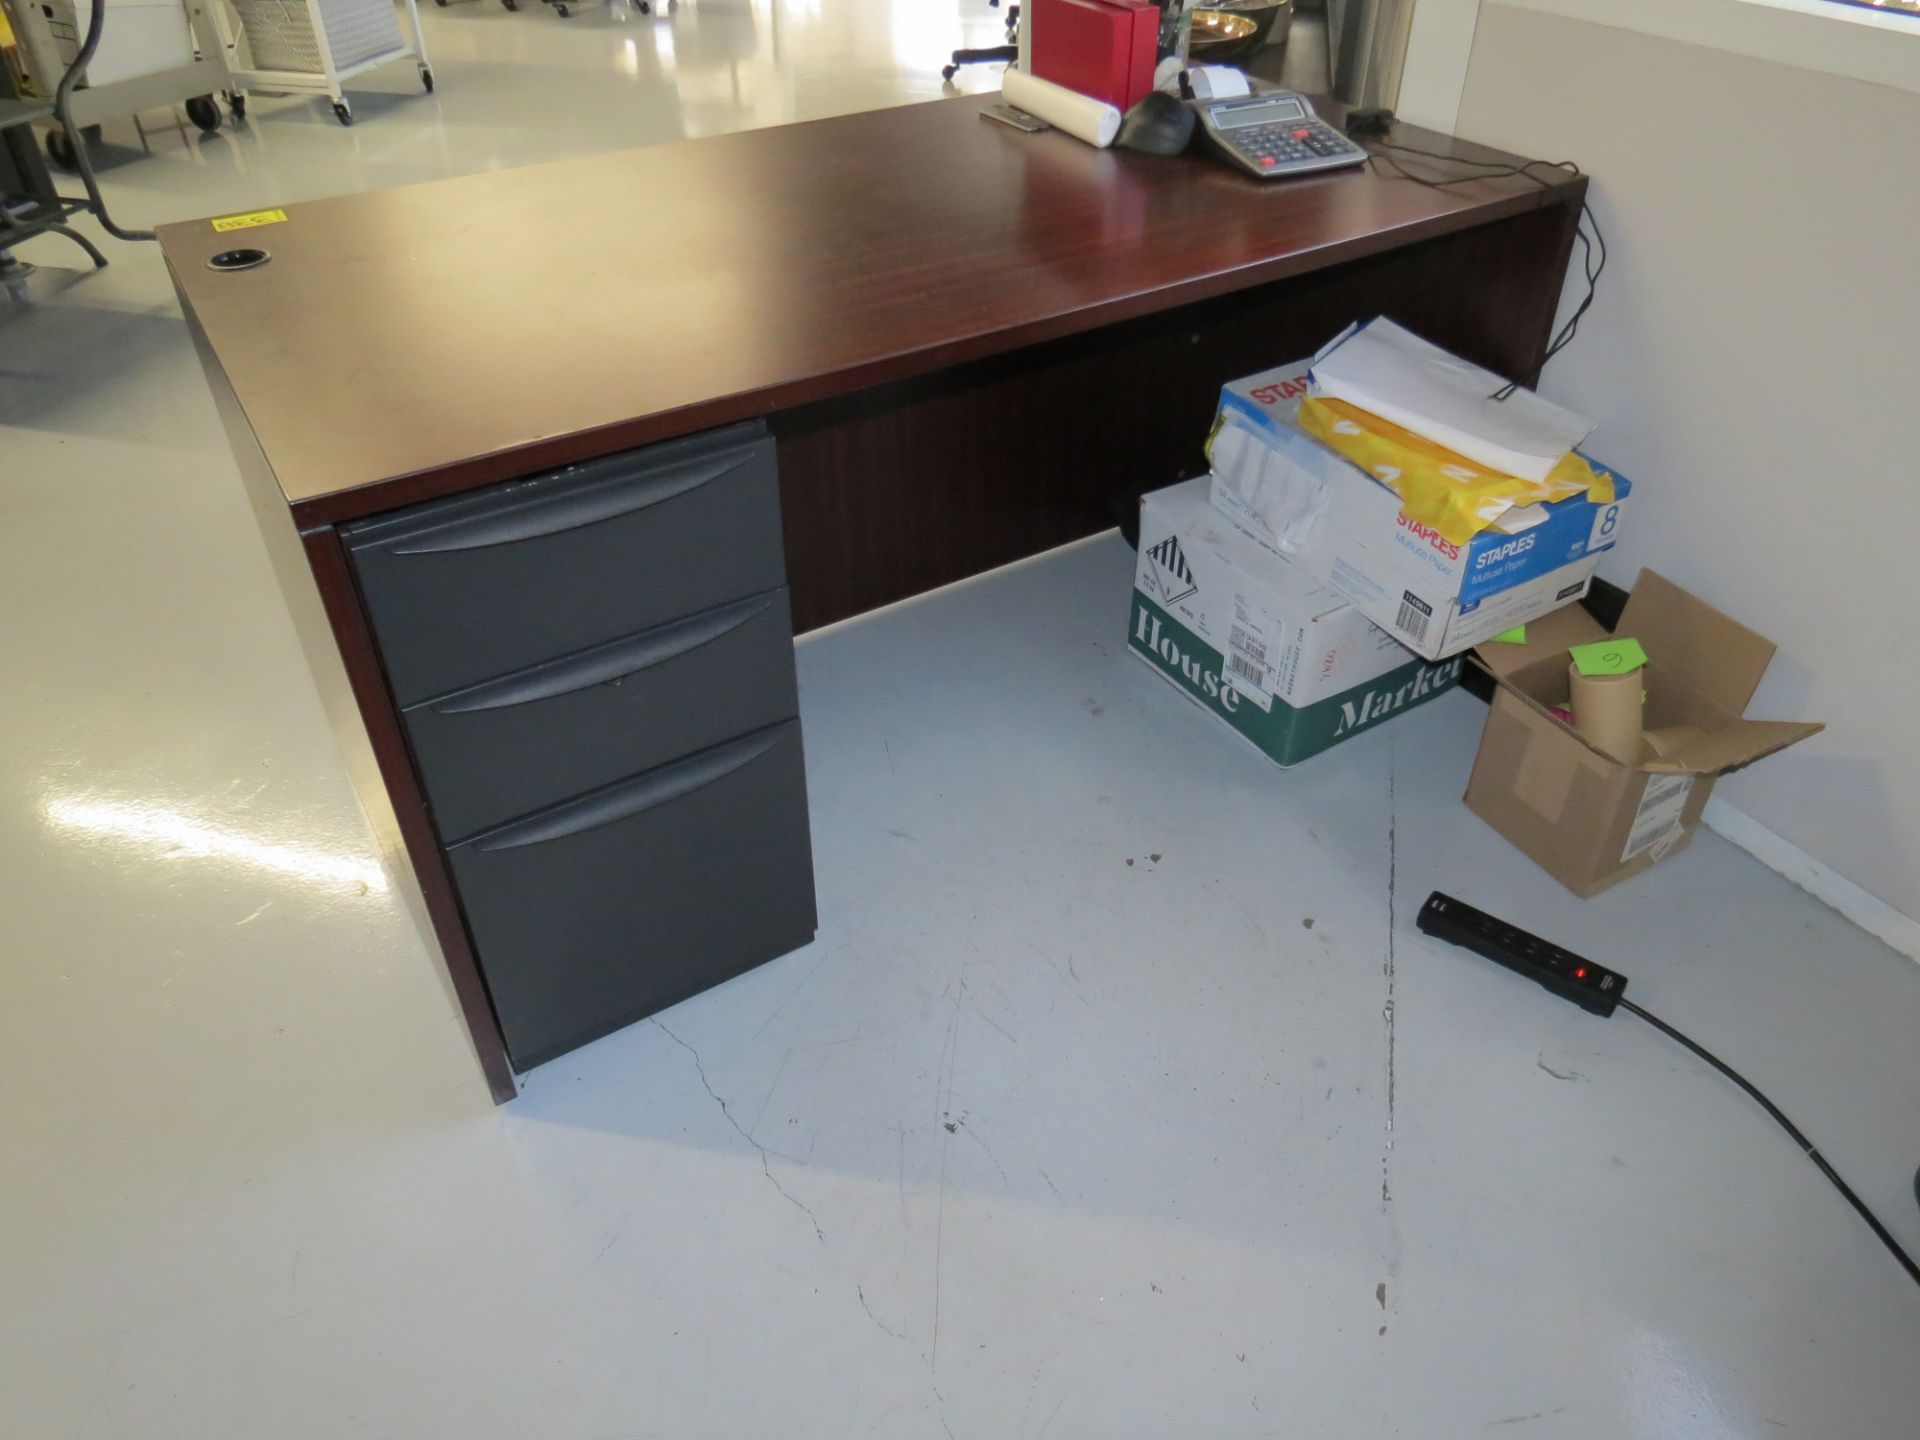 Cherrywood Laminated 3-Drawer Desk with No Chair - Image 2 of 2